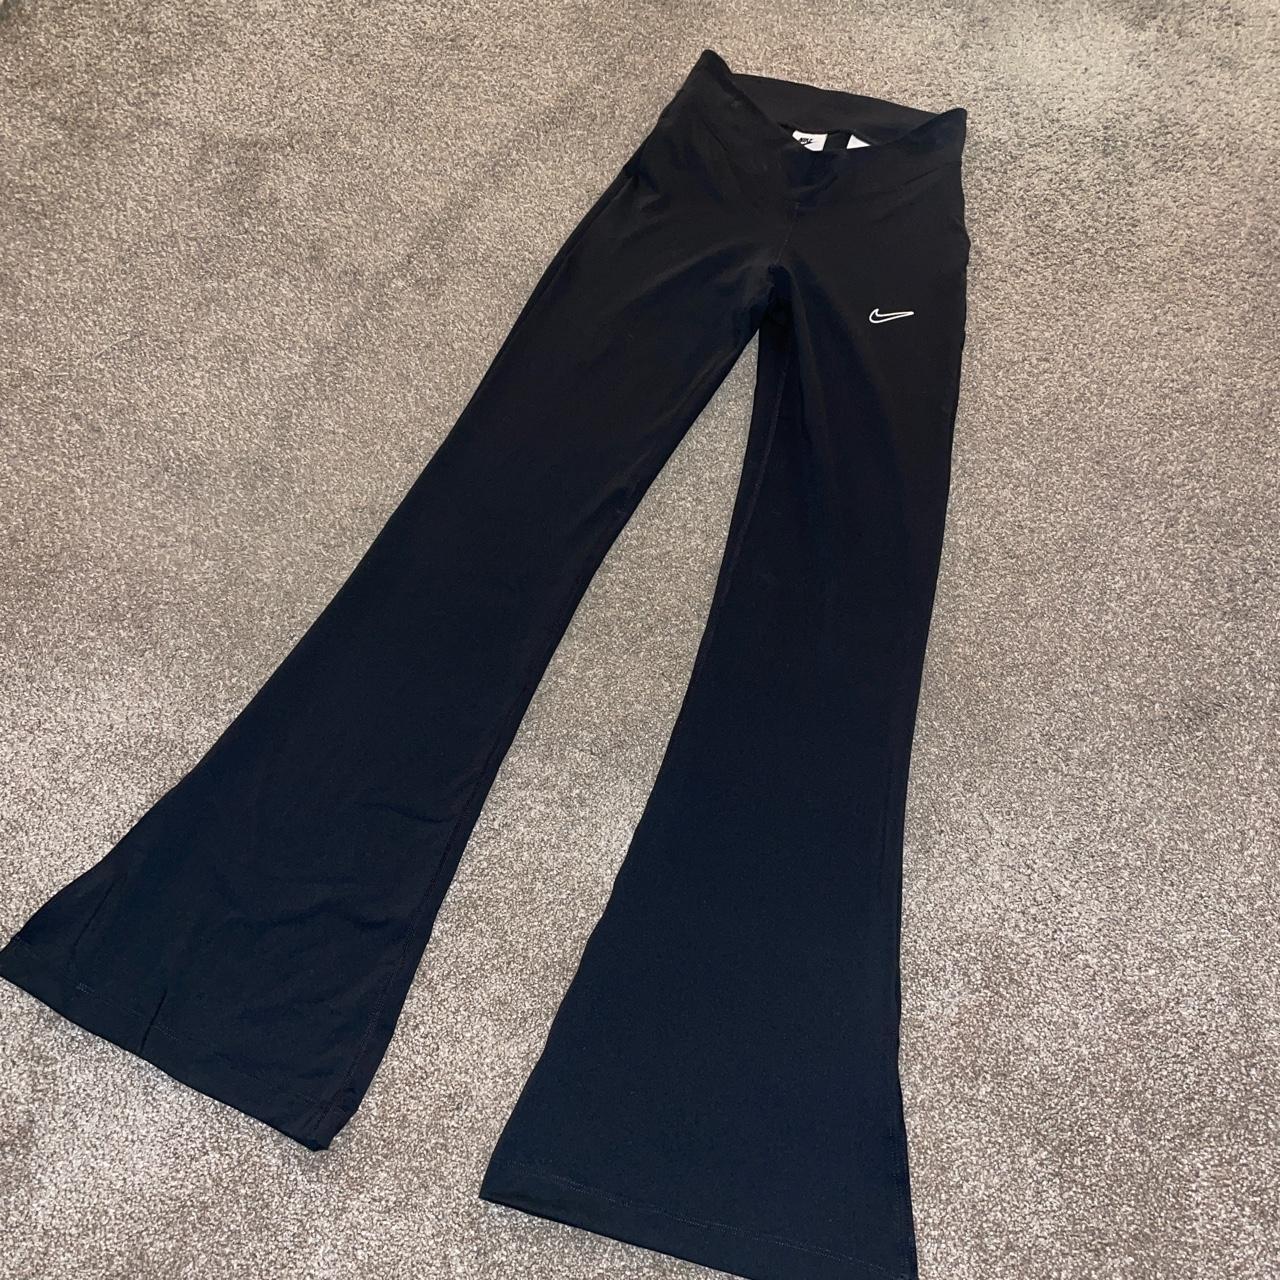 NIKE Flare Leggings in size EXTRA SMALL (XS) - tall - Depop